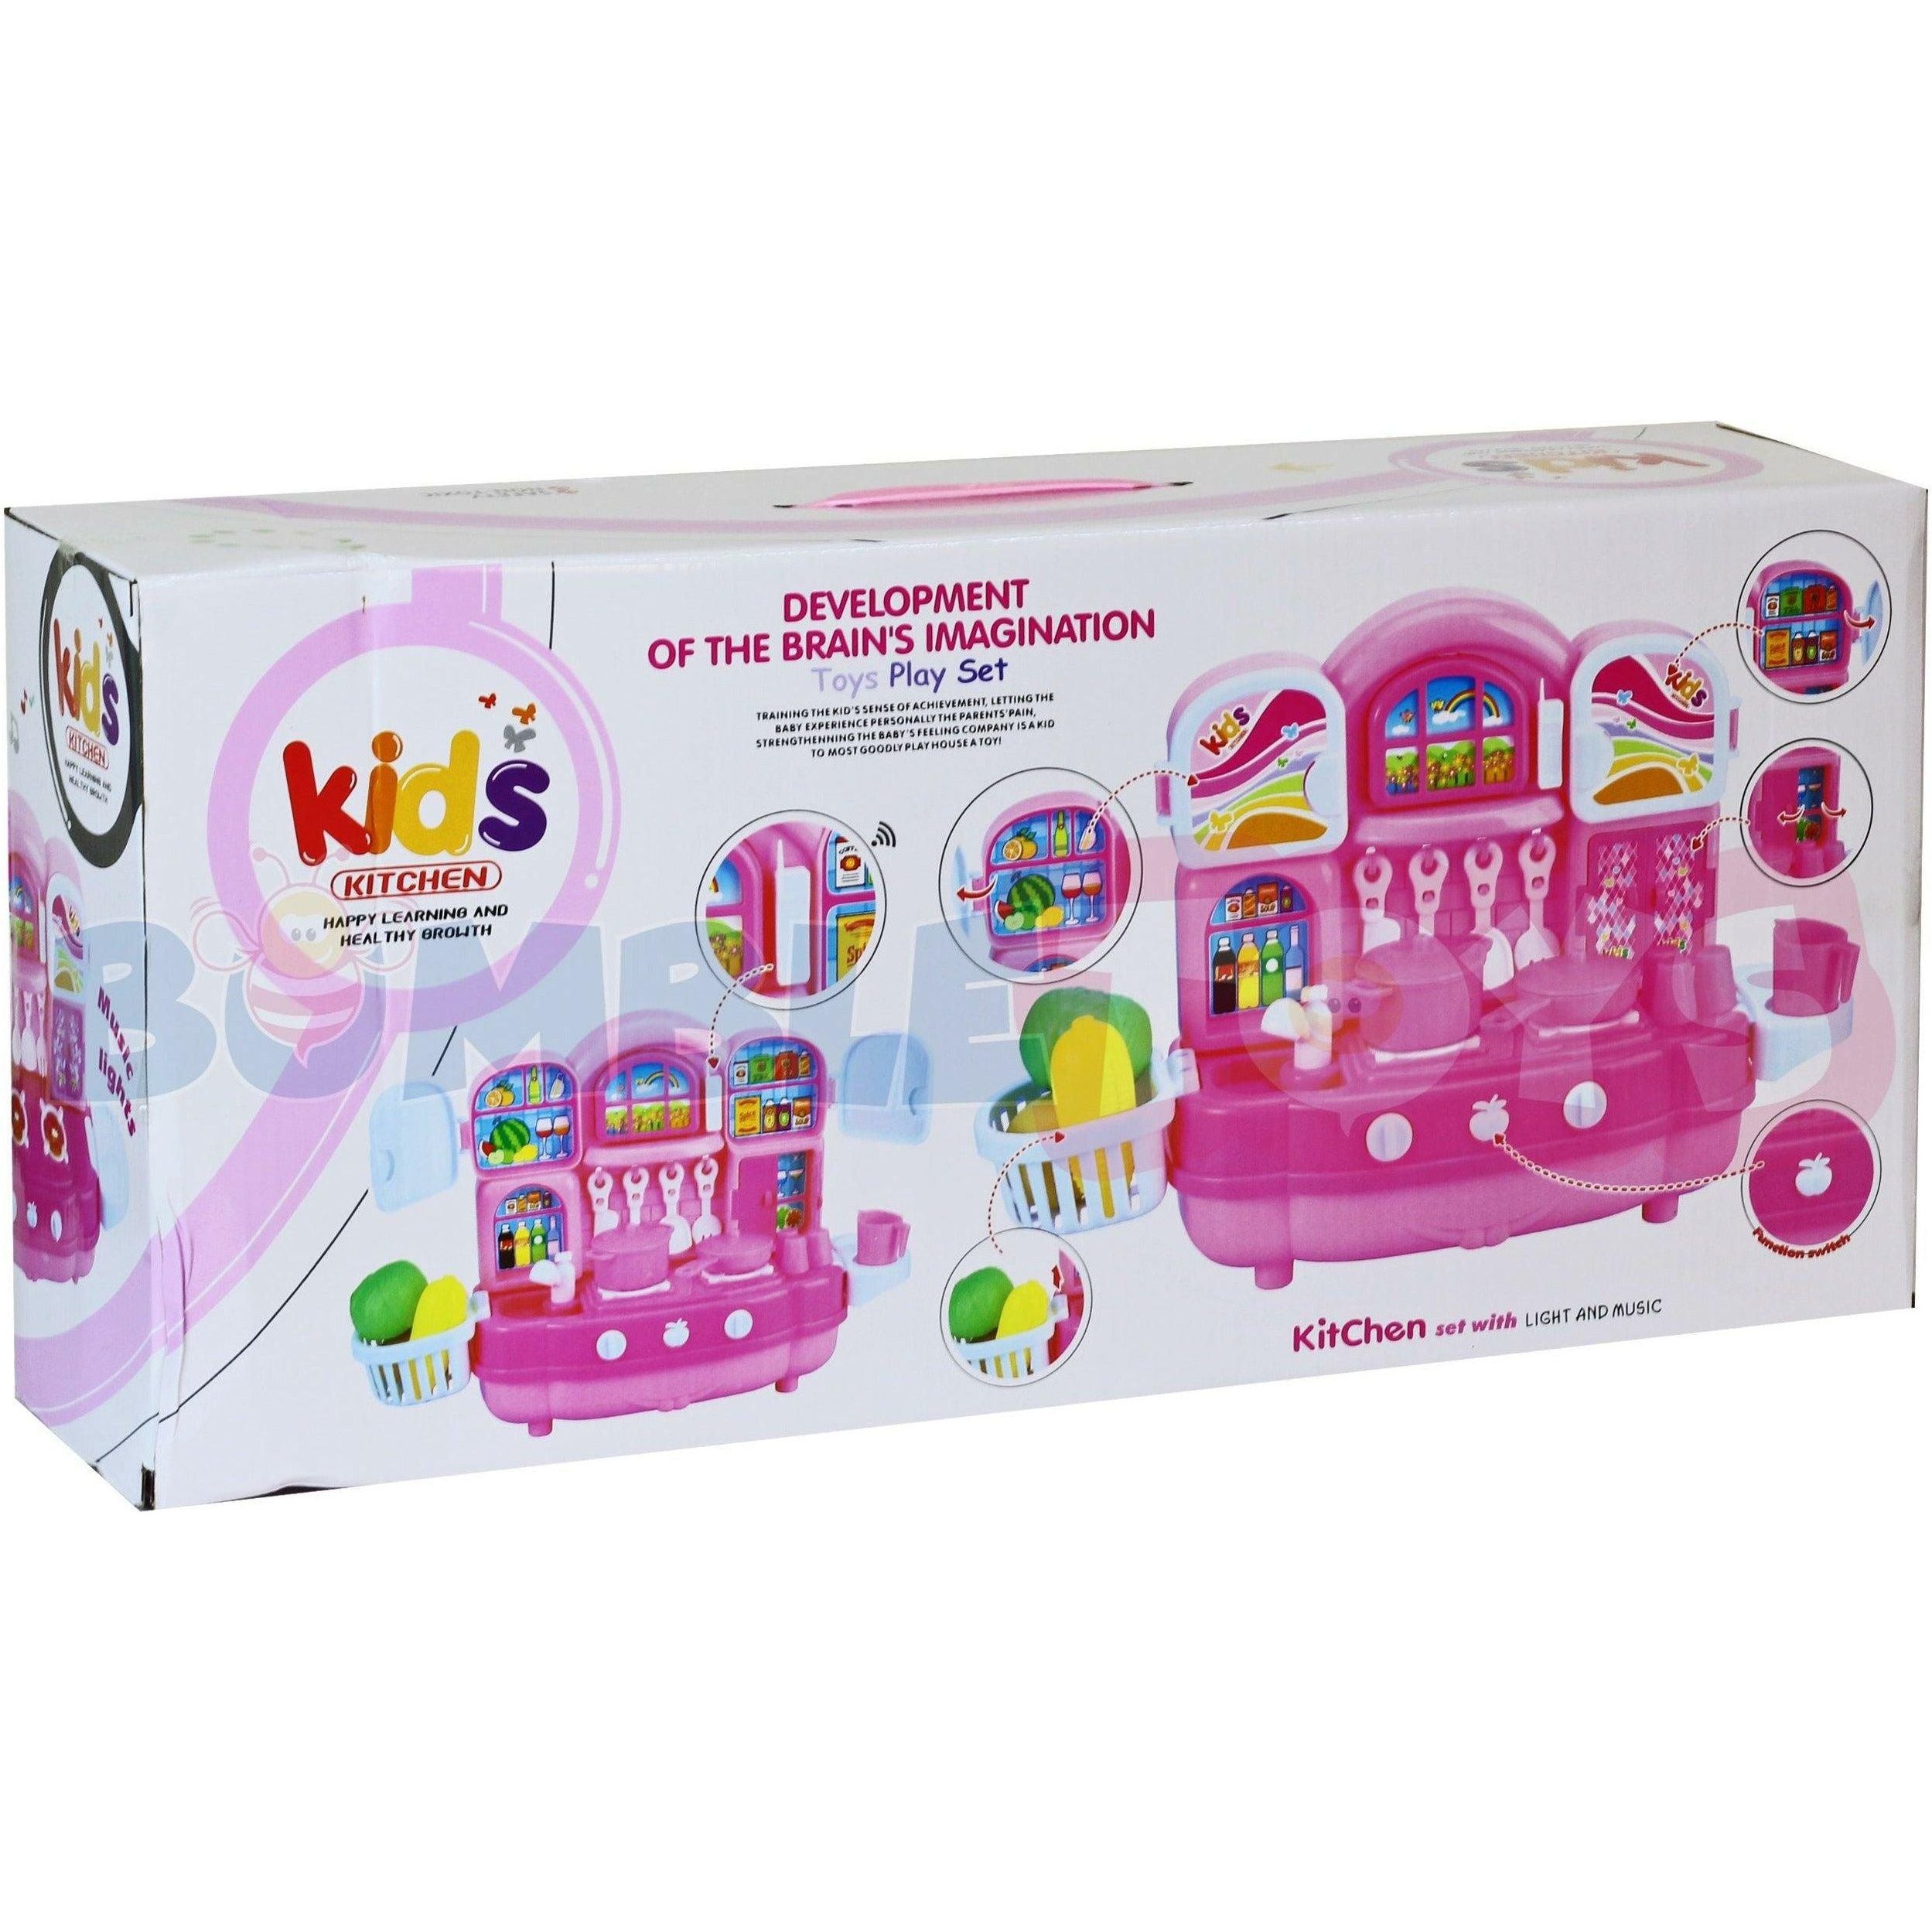 Kids Kitchen Play Set For Girls - BumbleToys - 5-7 Years, Funday, Girls, Kitchen & Play Sets